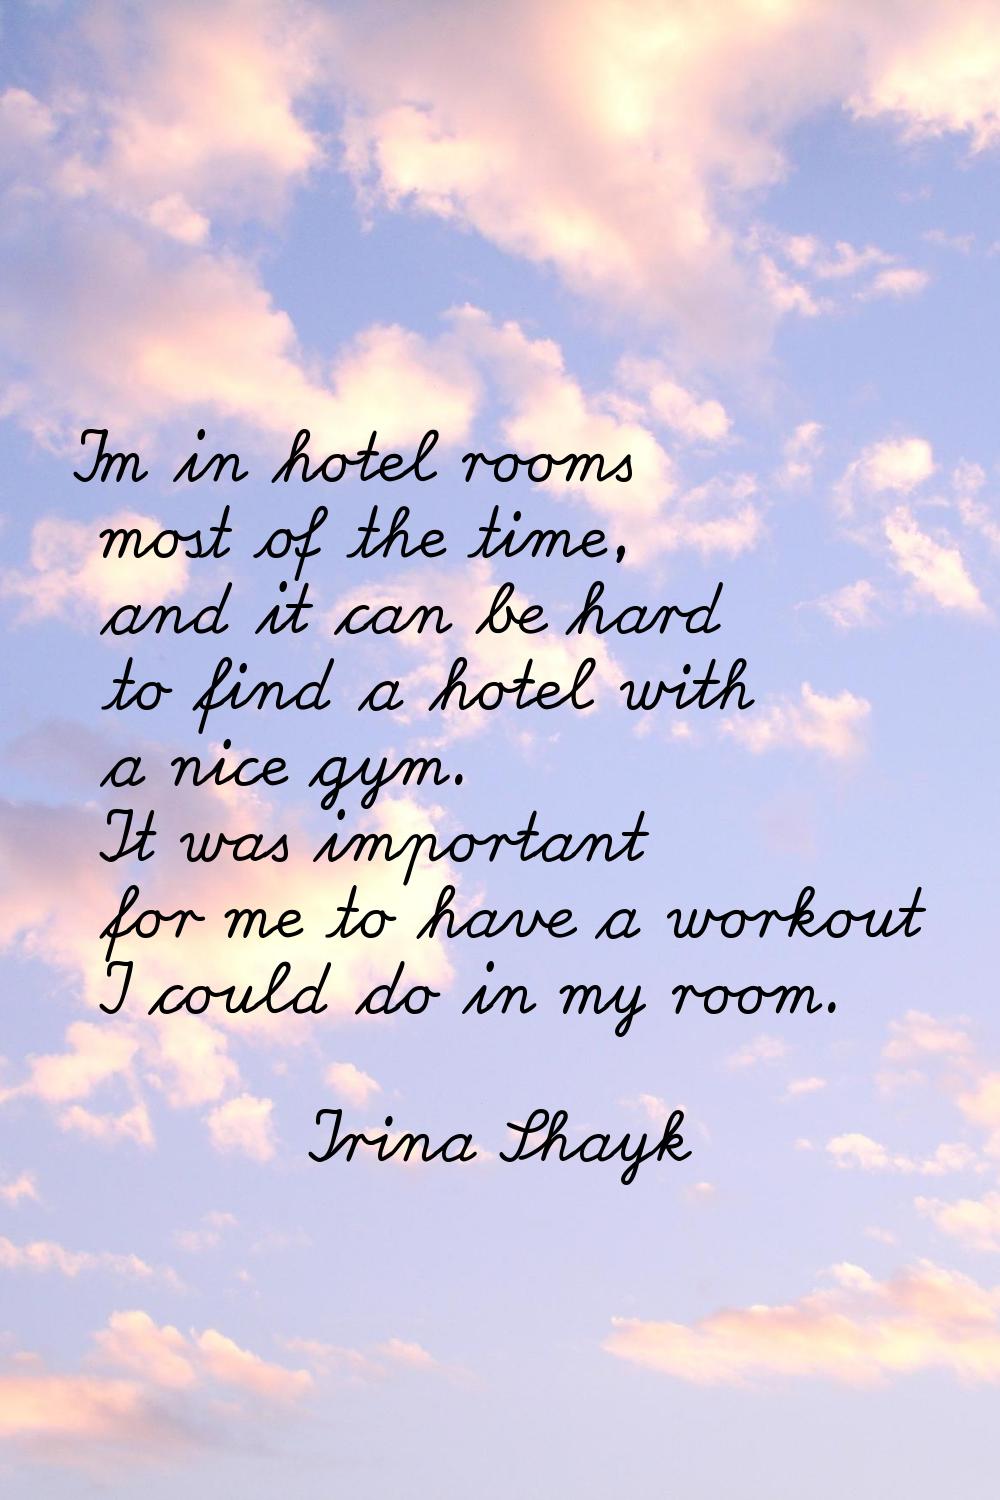 I'm in hotel rooms most of the time, and it can be hard to find a hotel with a nice gym. It was imp